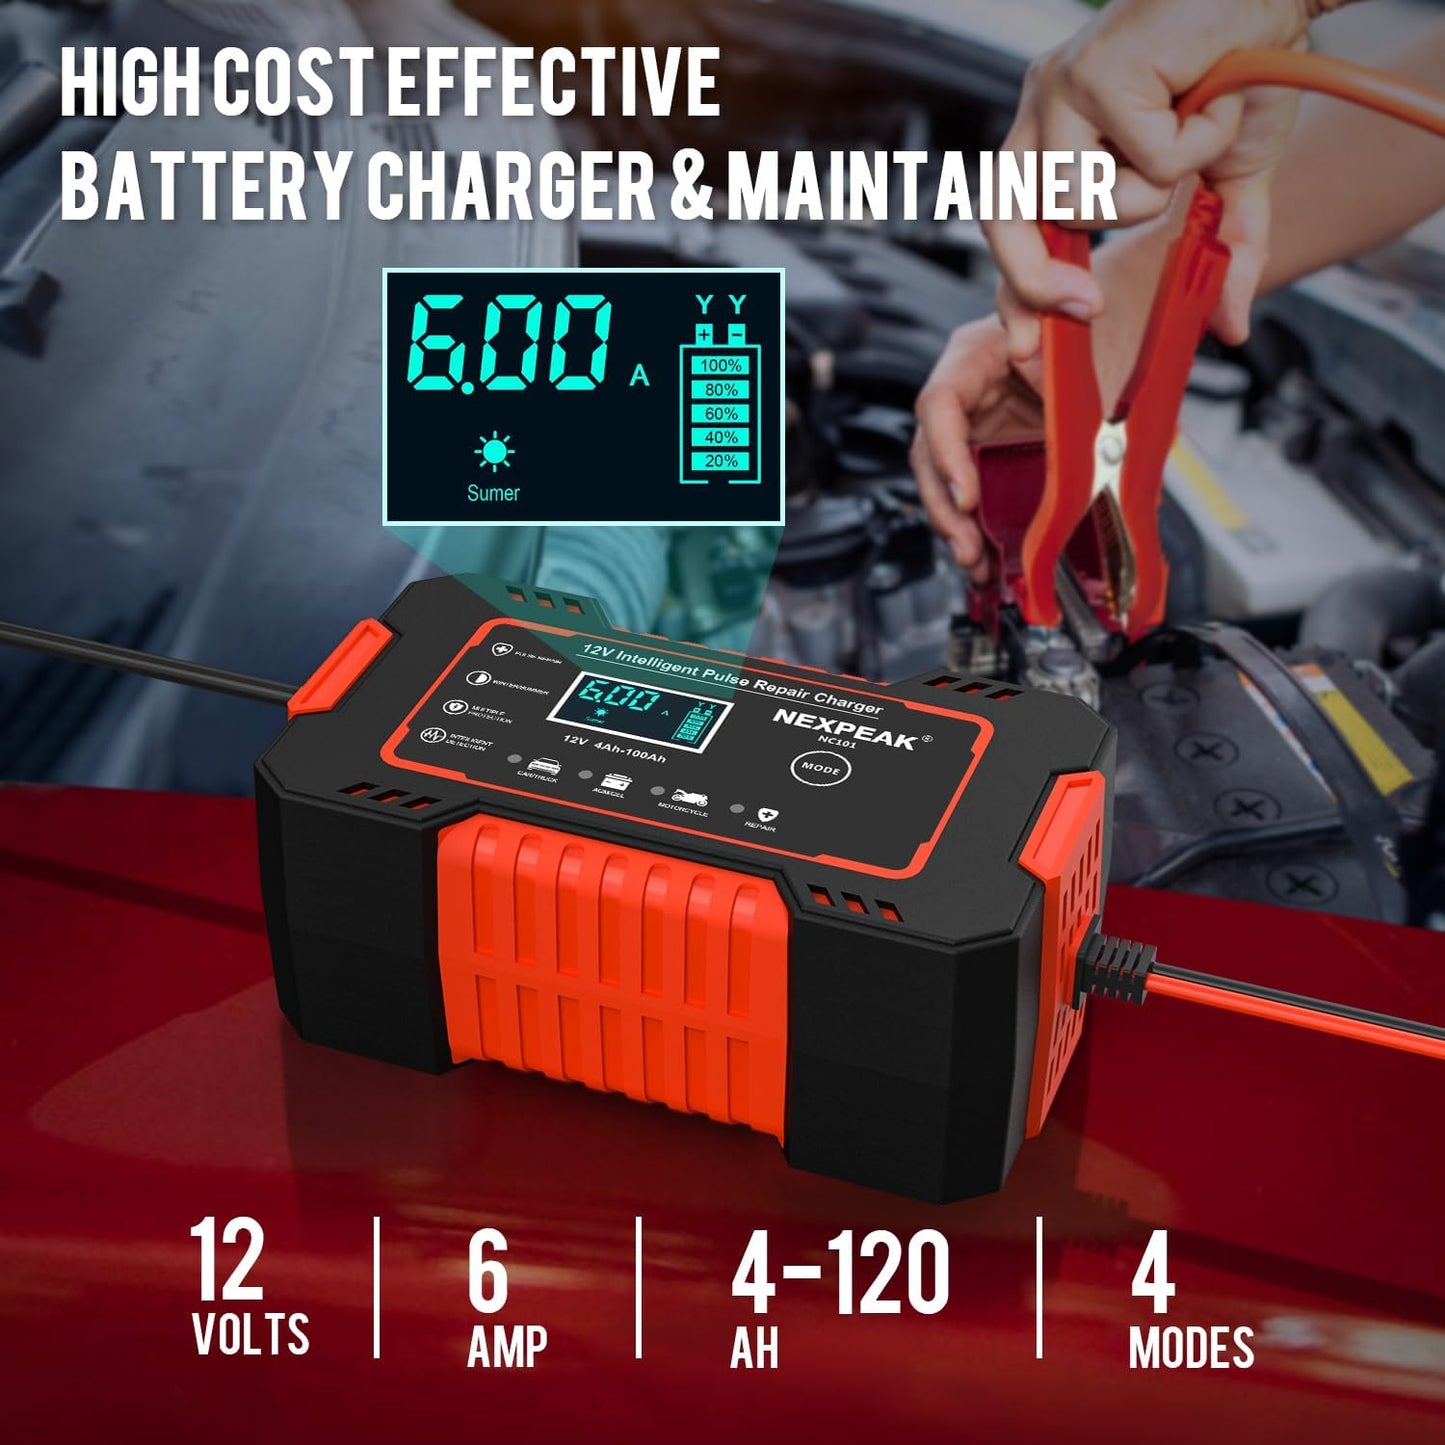 Car Battery Charger, 12V 6A Smart Battery Trickle Charger Automotive 12V Battery Maintainer Desulfator with Temperature Compensation for Car Truck Motorcycle Lawn Mower Marine Lead Acid Batteries